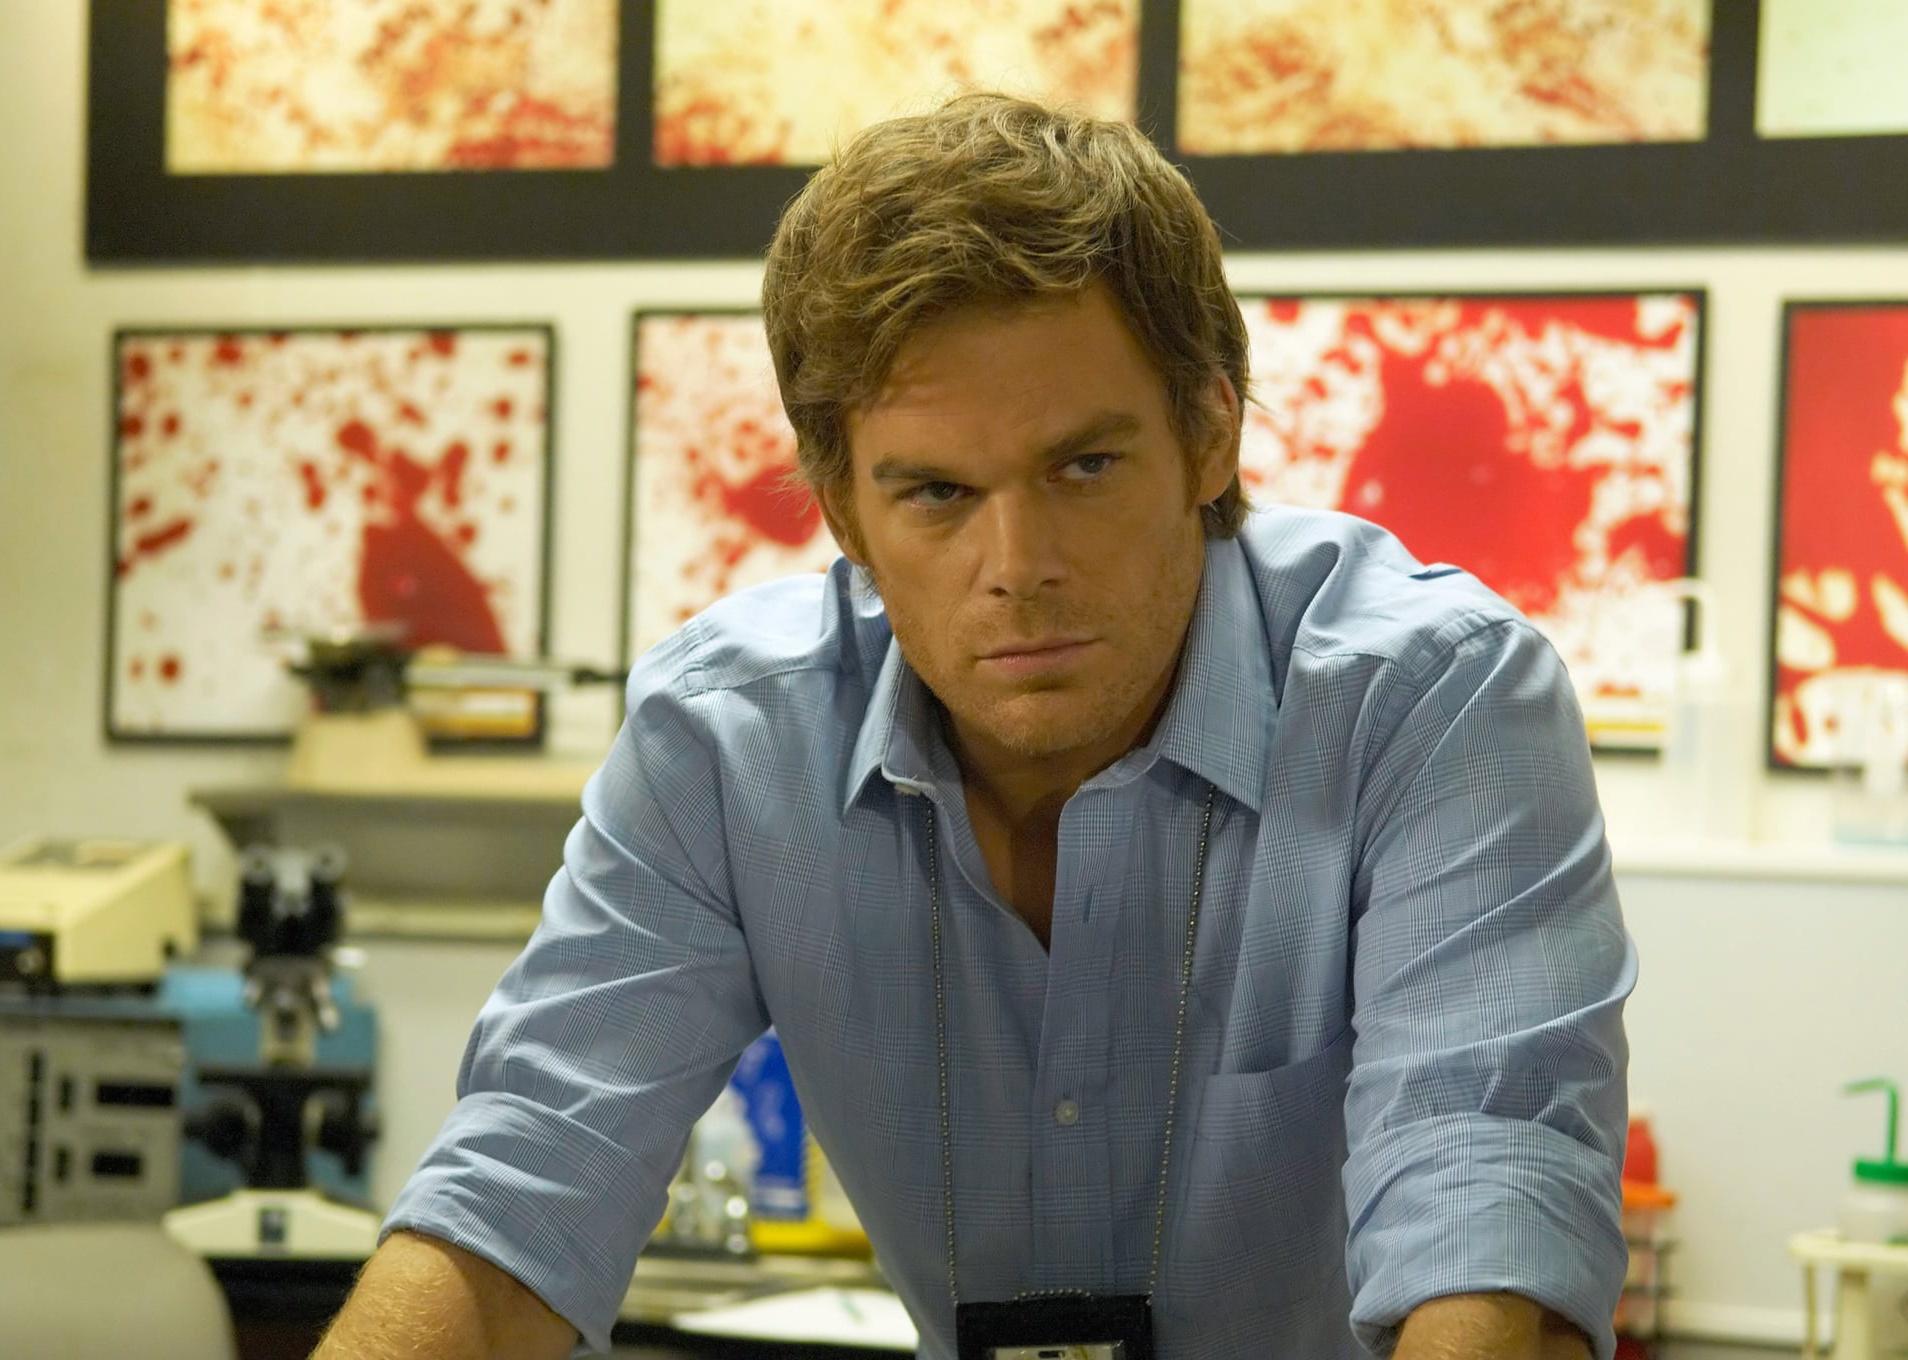 Michael C. Hall standing in an office wearing a badge in front of a wall of blood spatter images.